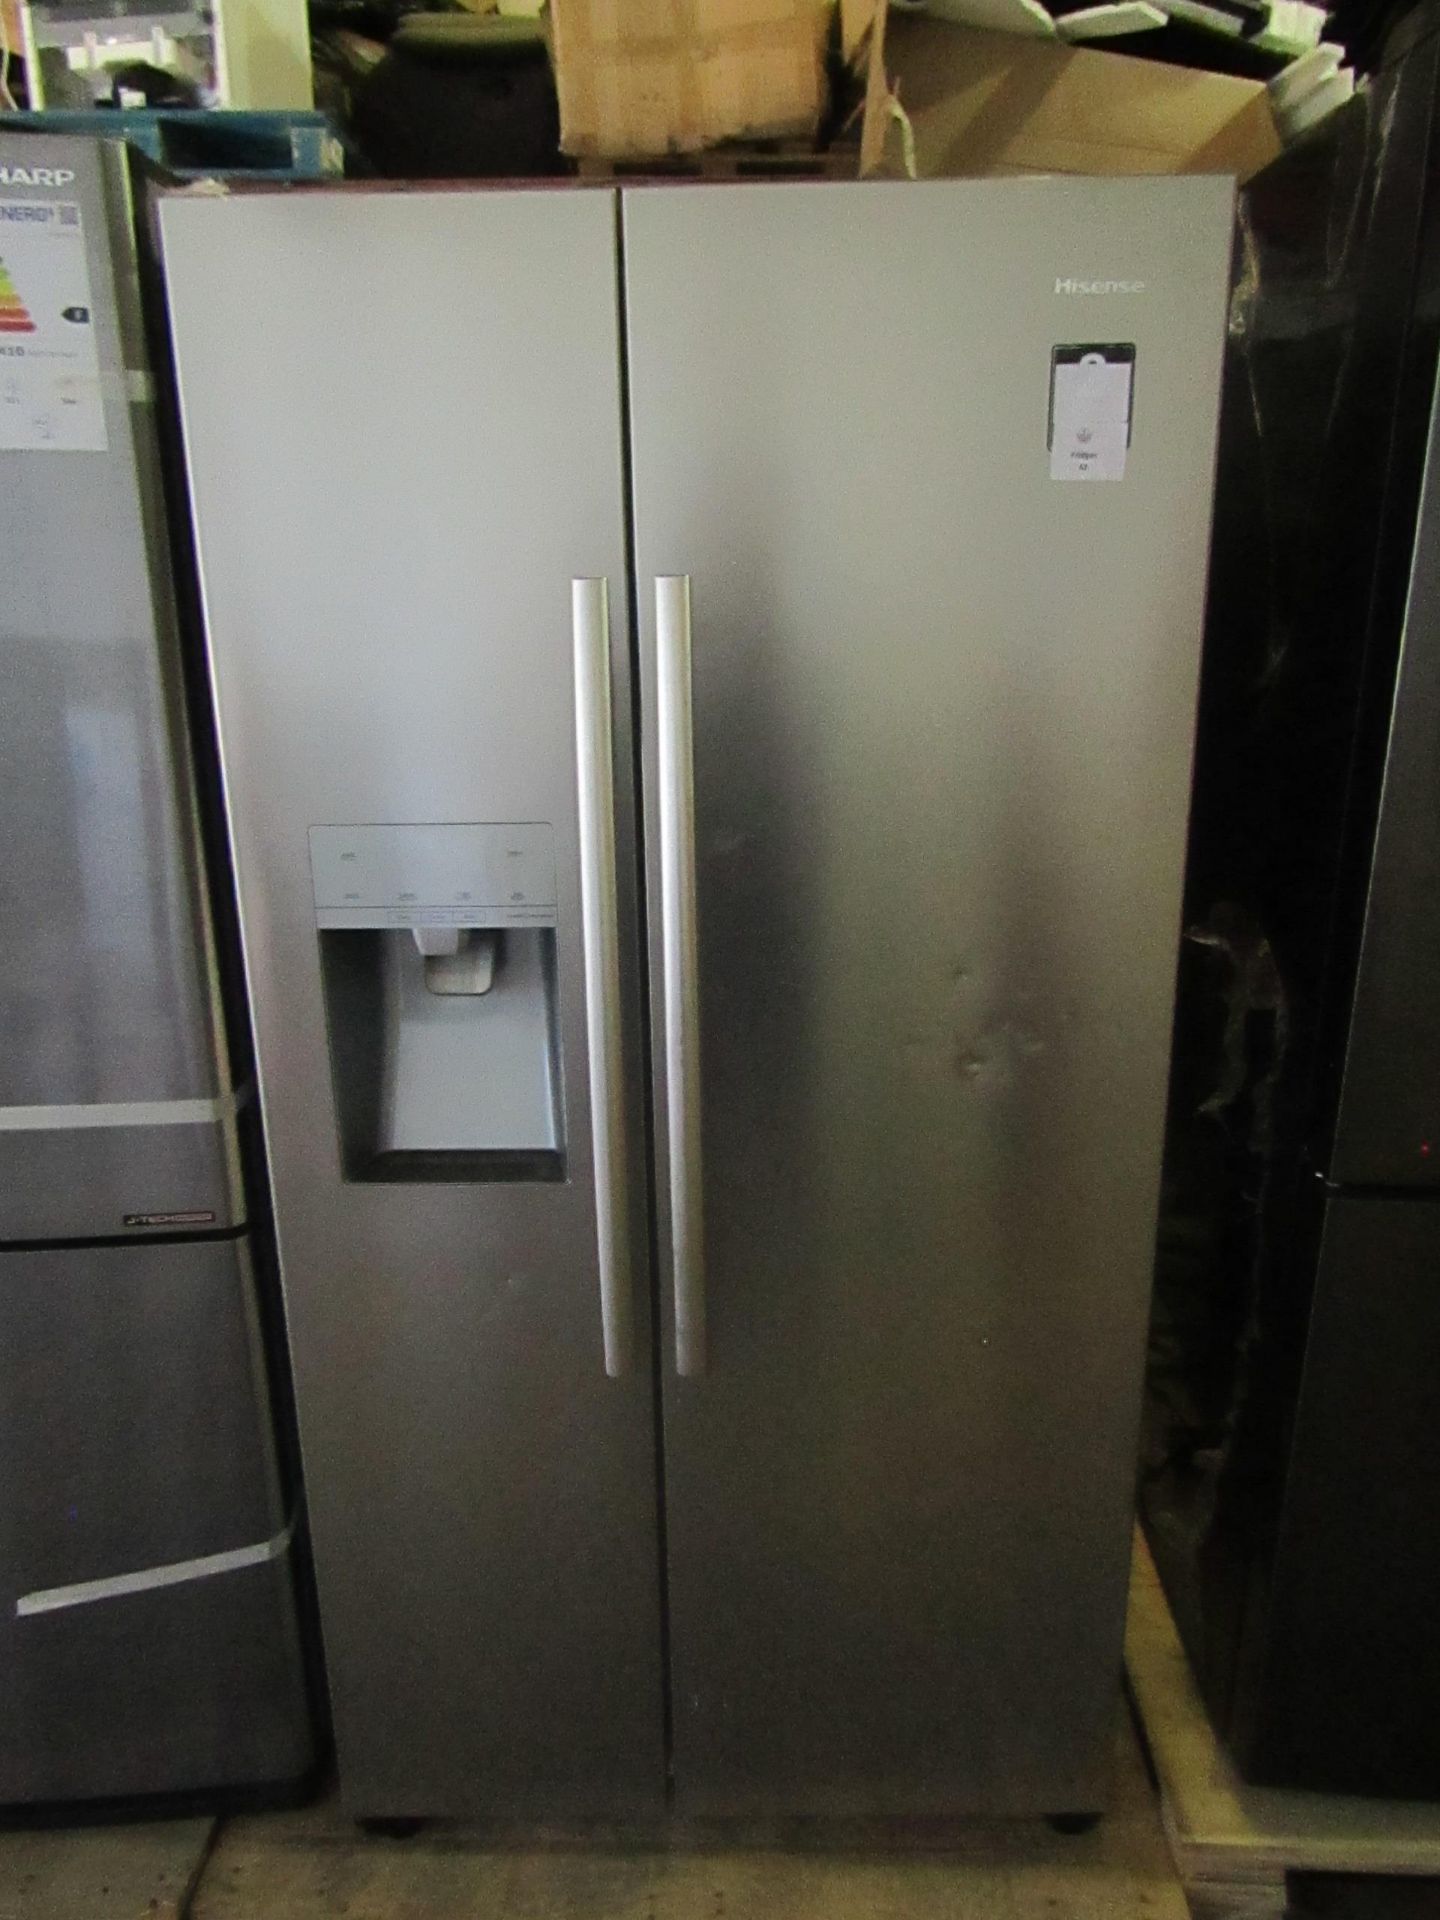 hisense American fridge freezer with water and ice dispenser, the fridge nad freezer with tested and